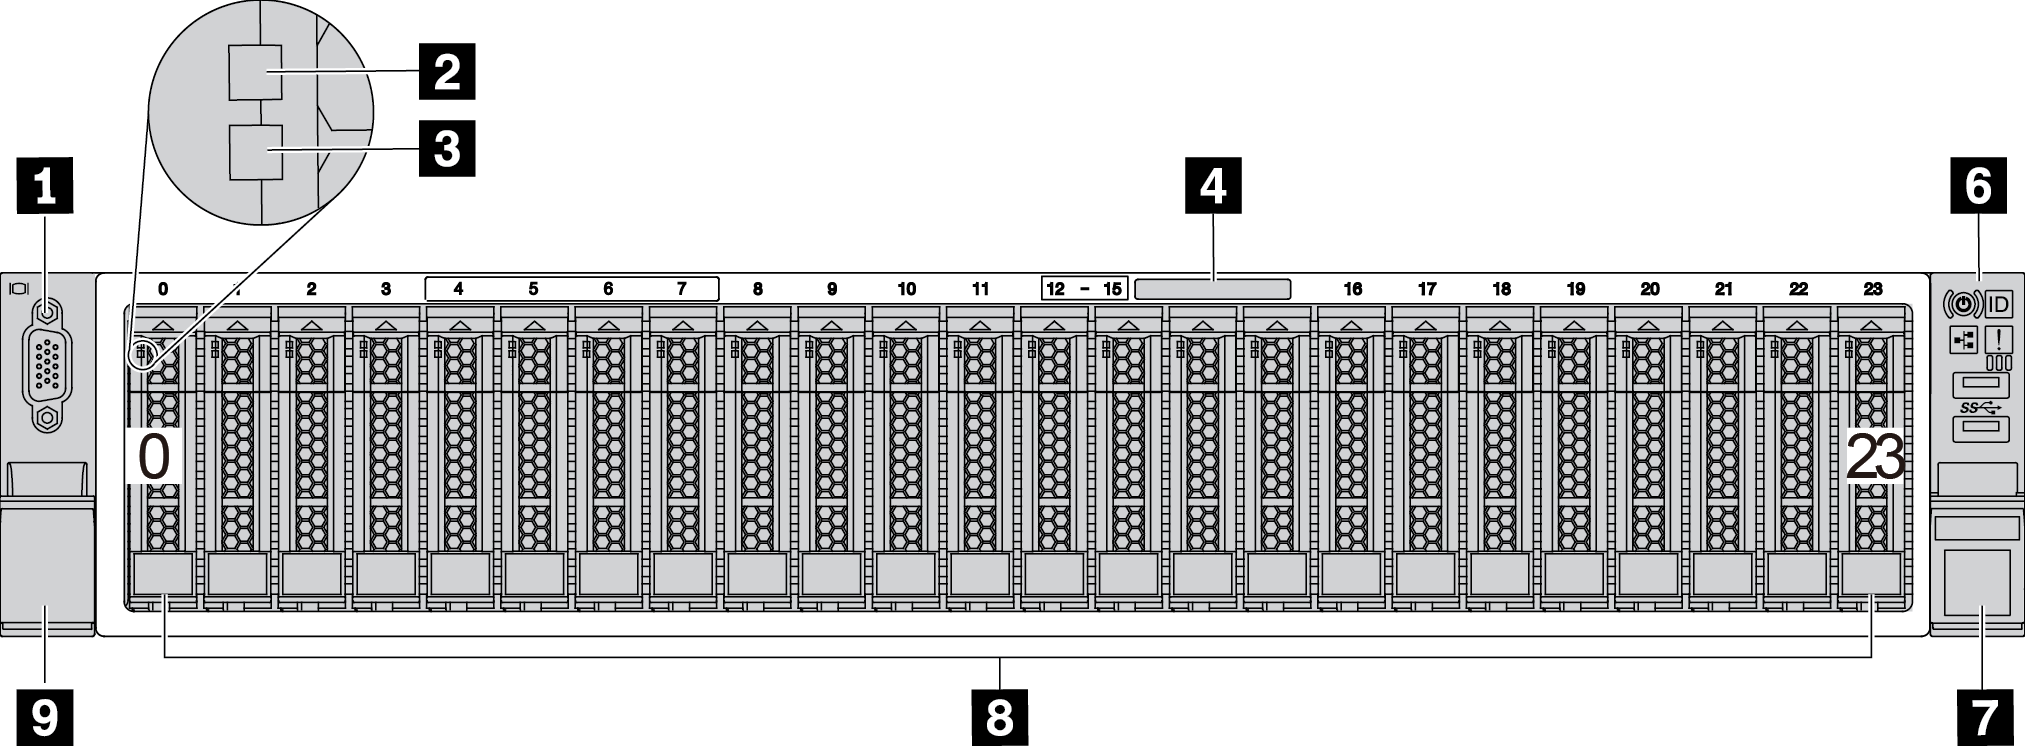 Front view of server models with twenty-four 2.5-inch drive bays